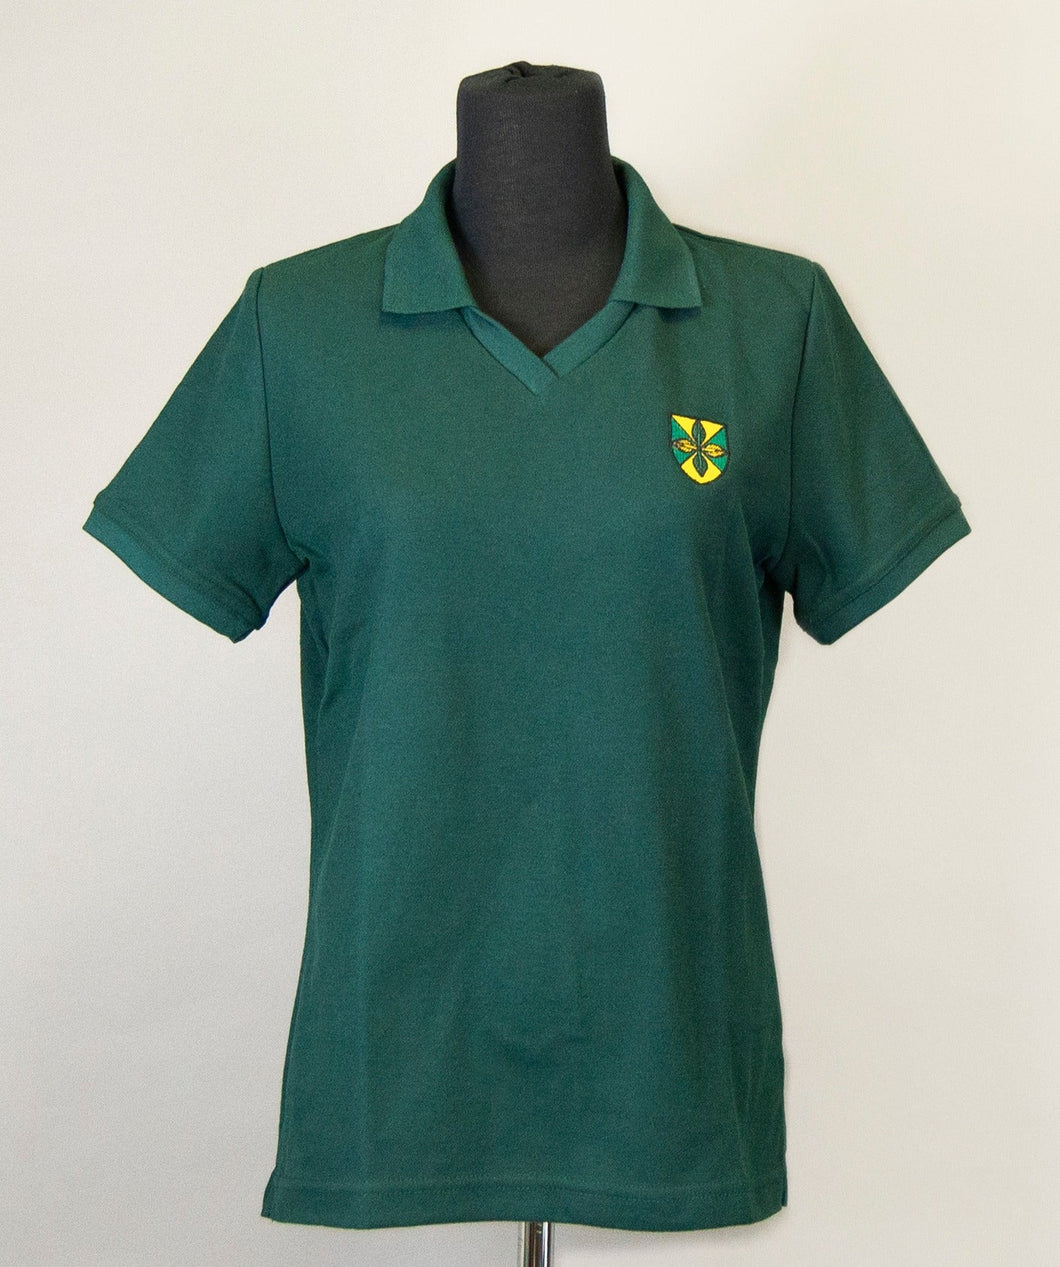 Polo Shirt - Green - Youth Sizes